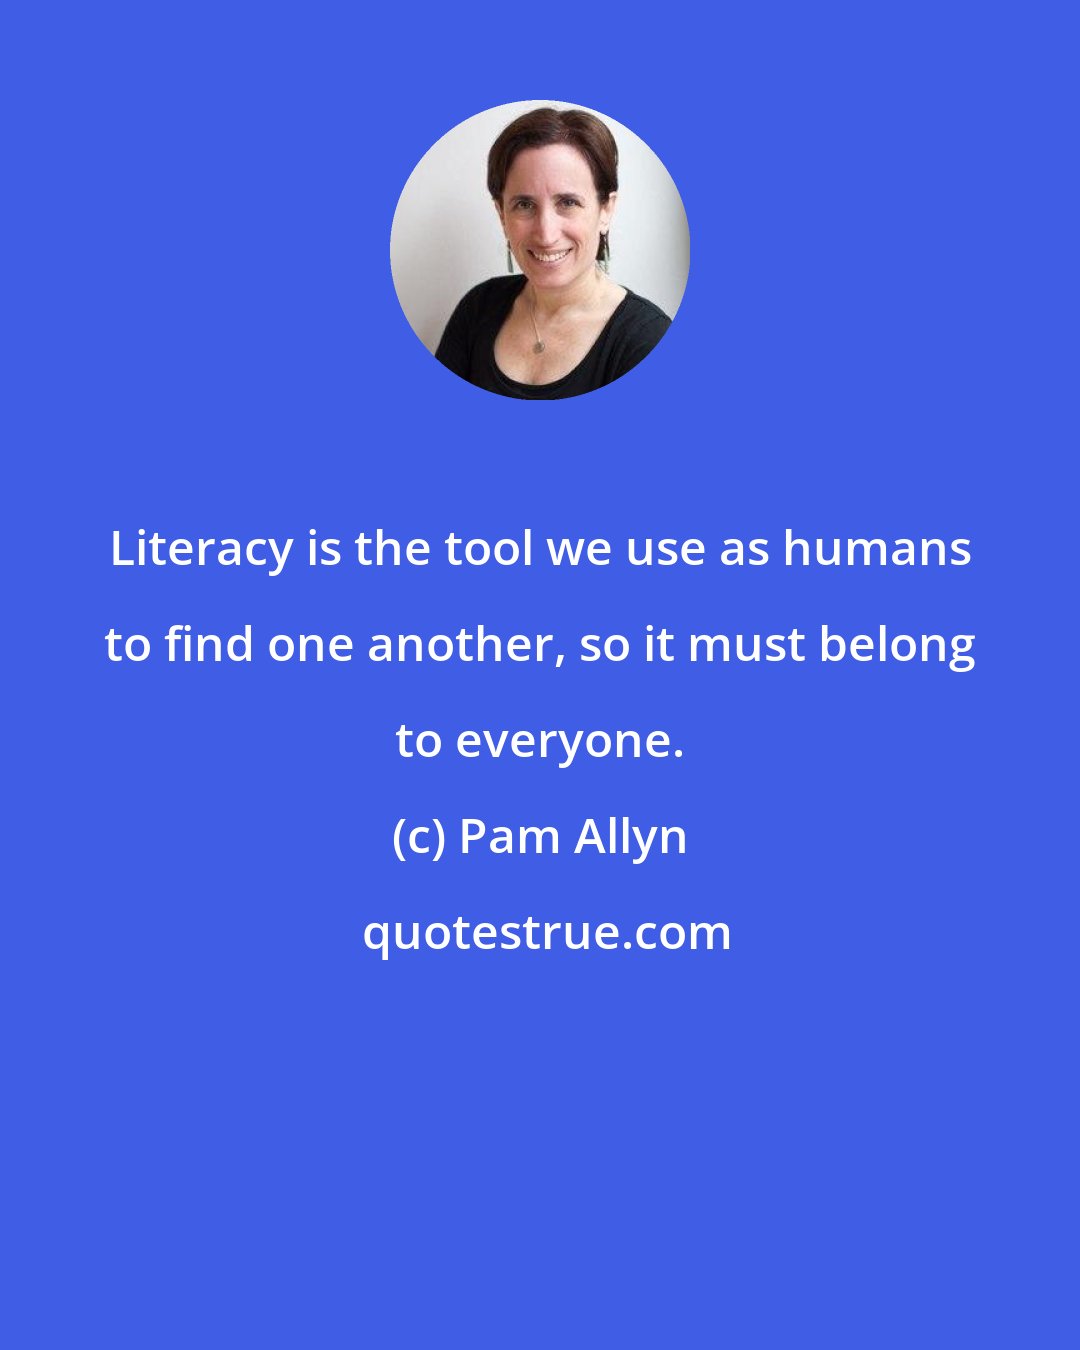 Pam Allyn: Literacy is the tool we use as humans to find one another, so it must belong to everyone.